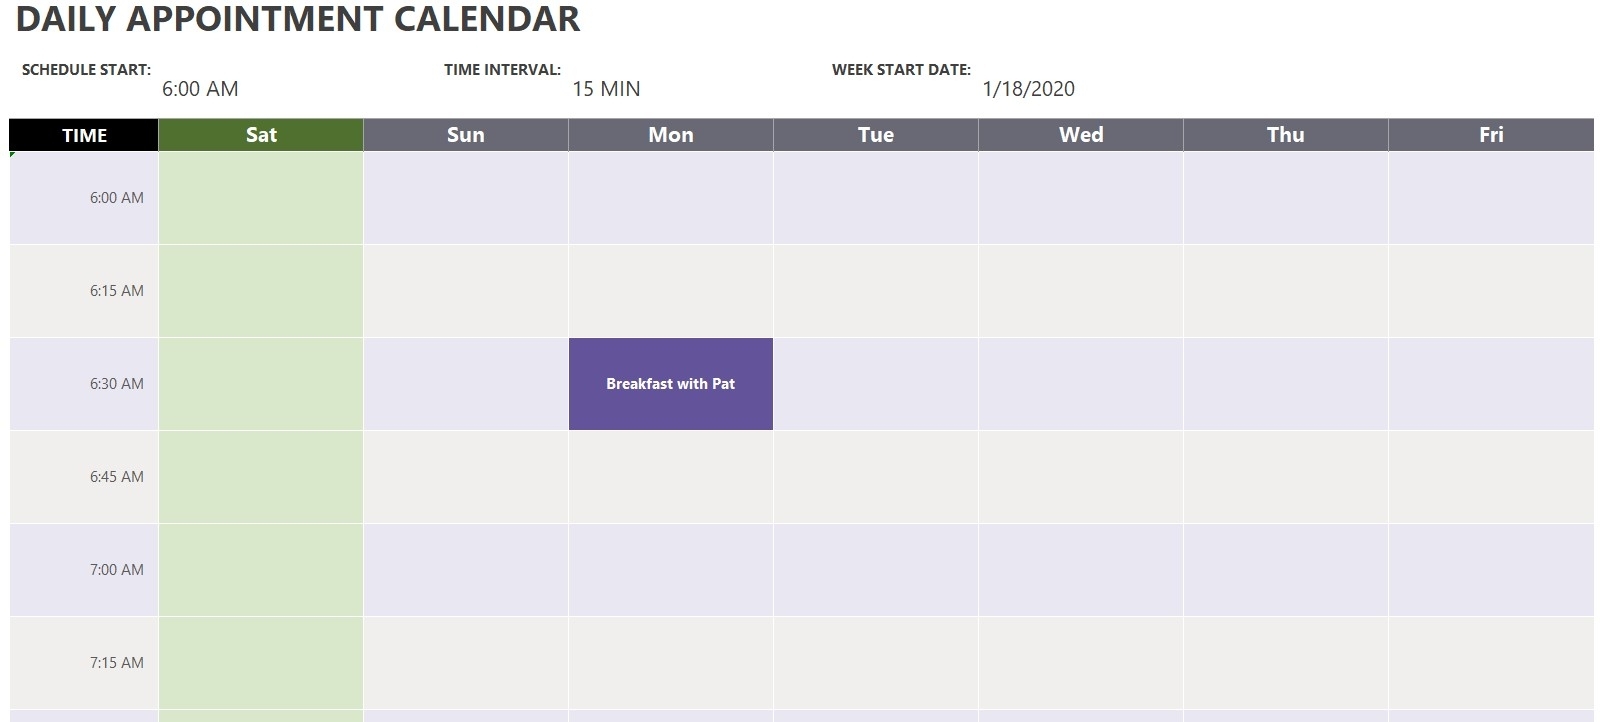 Daily Appointment Calendar Template | Excel Templates